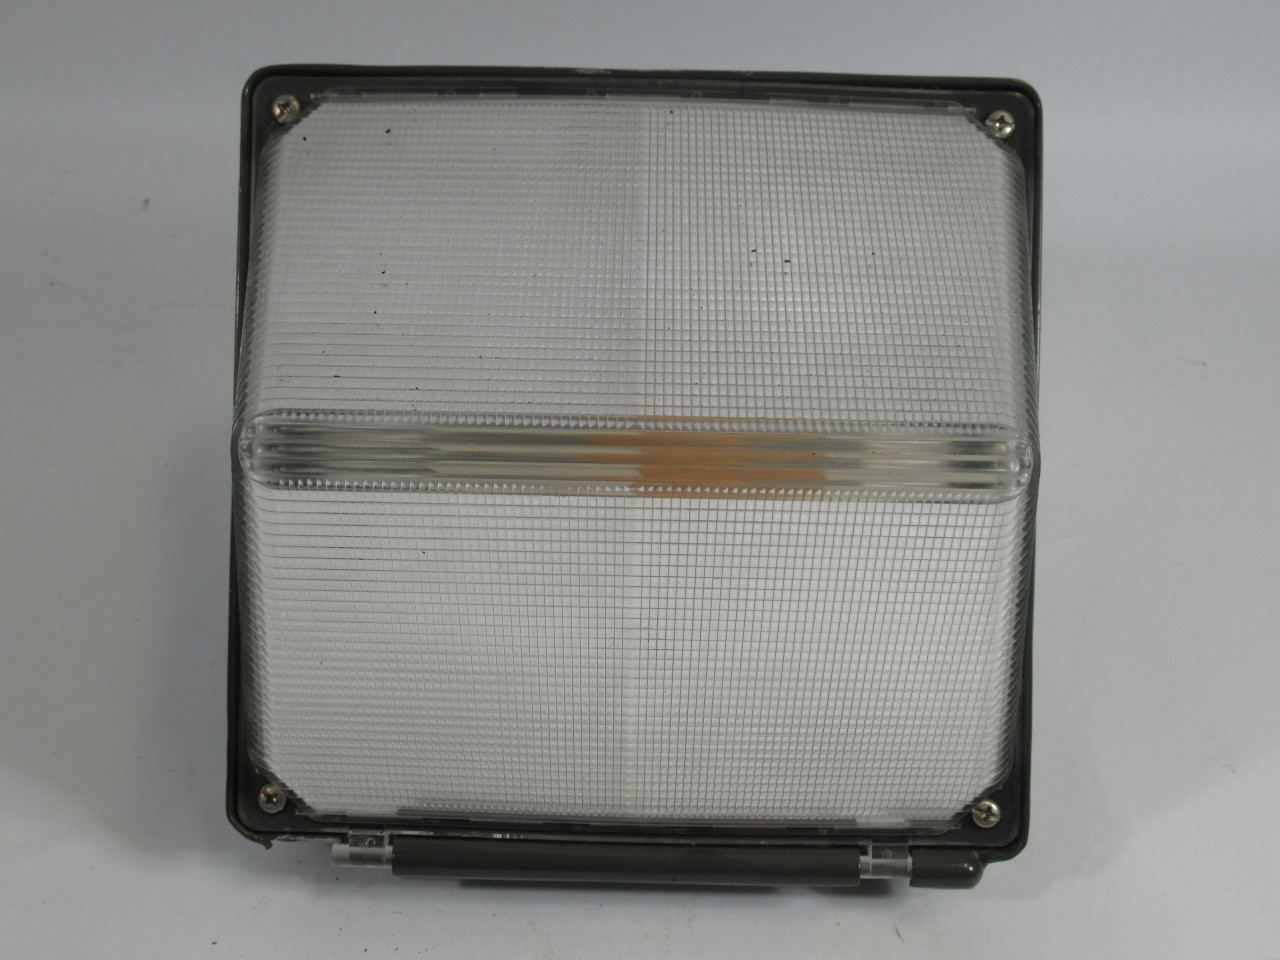 Keene-Widelite WPS070NLXL-1 Outdoor Light Fixture 120V 60Hz 1.6A USED